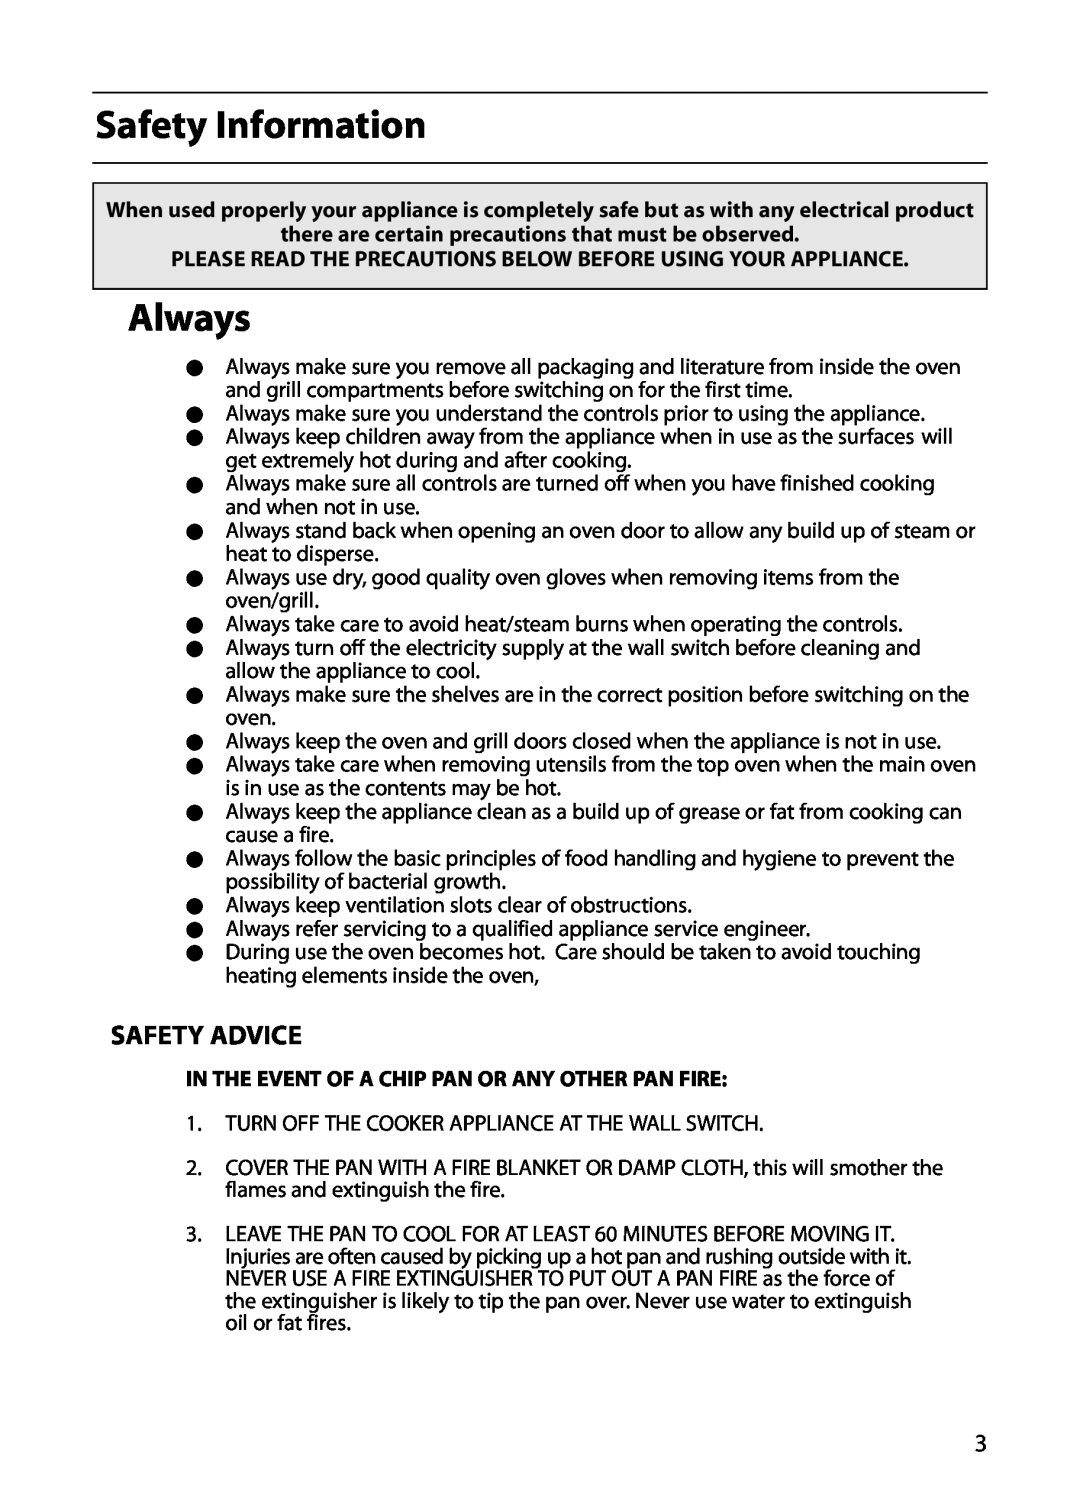 Indesit FIU20 manual Safety Information, Always, Safety Advice, there are certain precautions that must be observed 